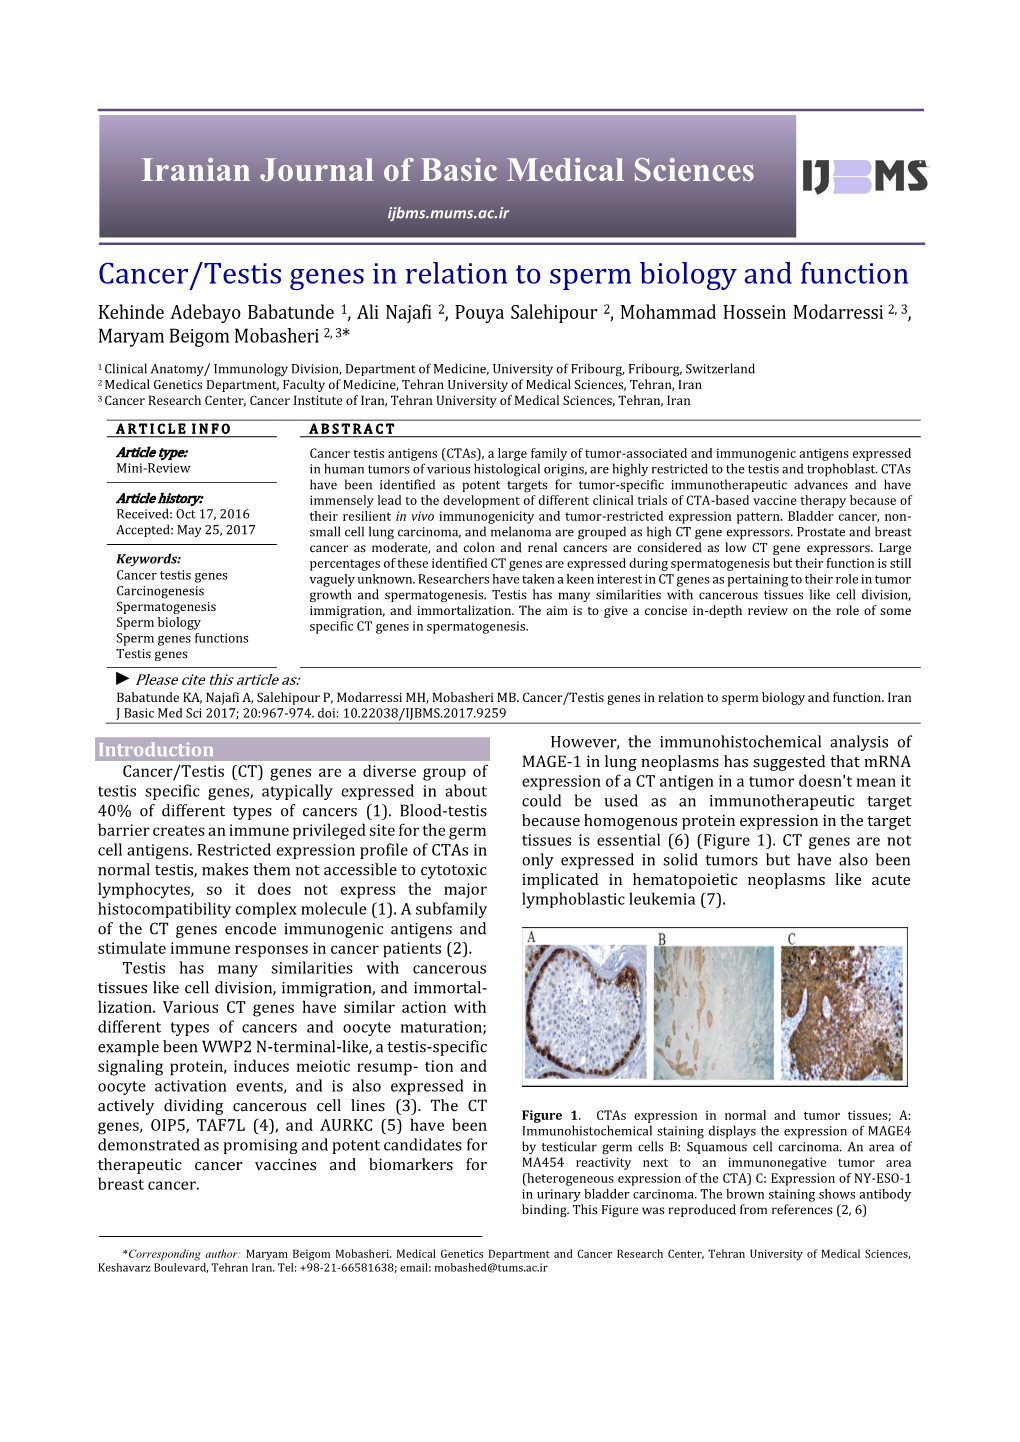 Cancer/Testis Genes in Relation to Sperm Biology and Function